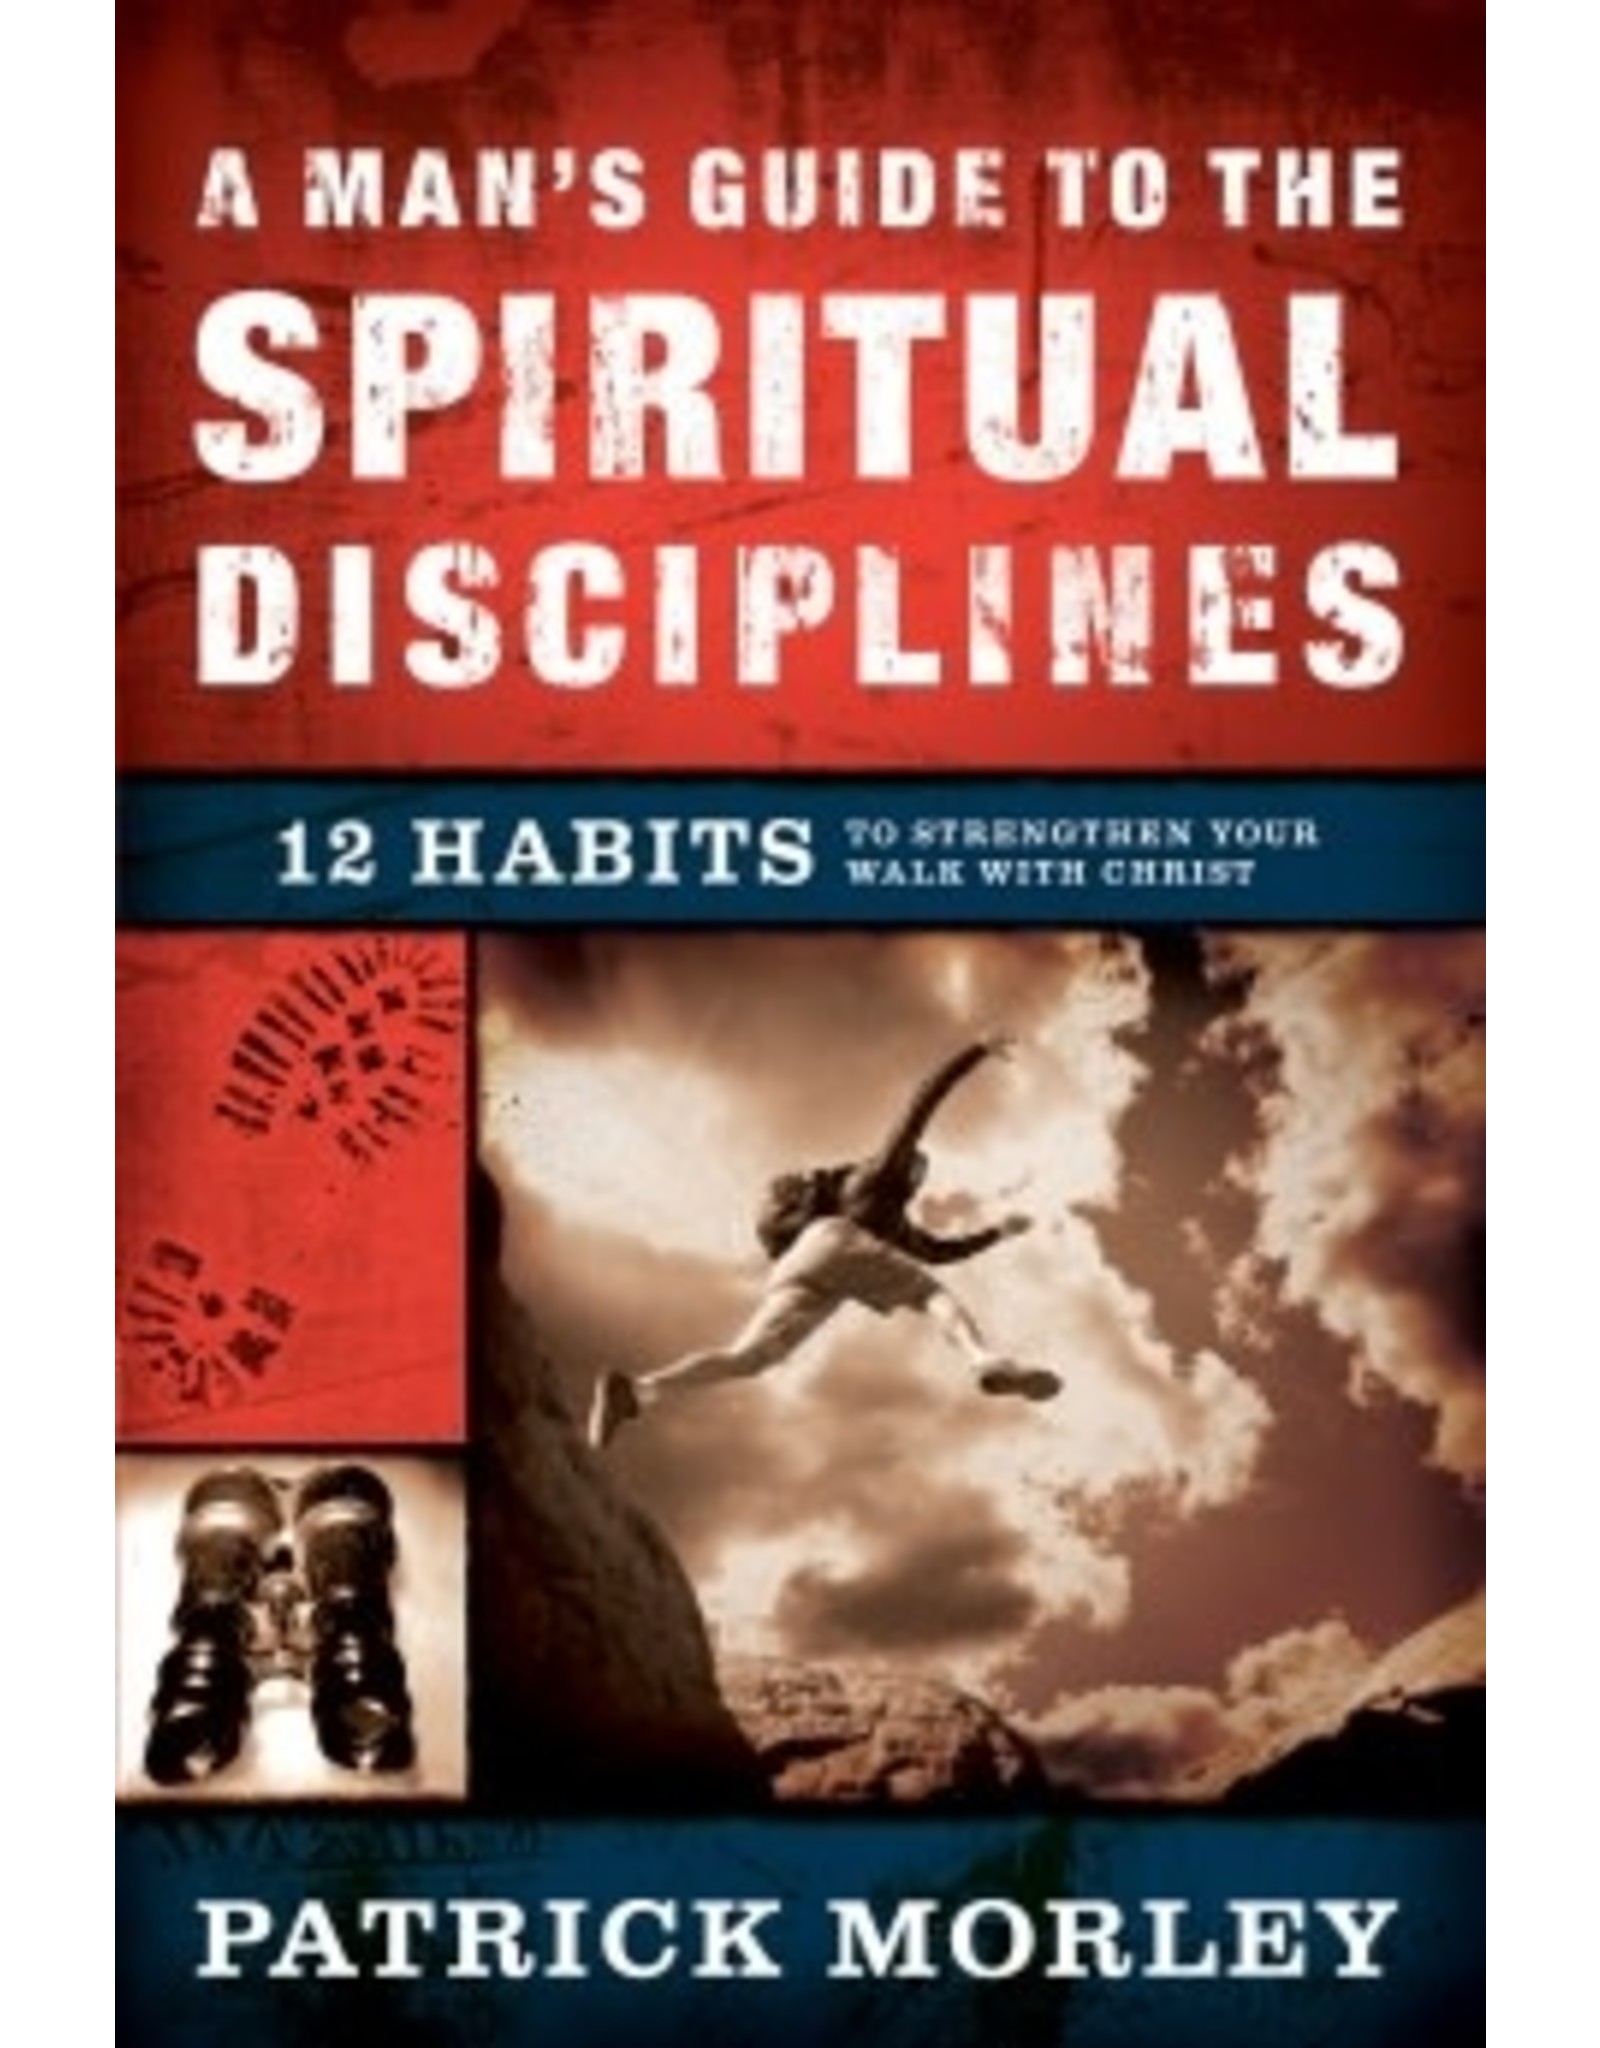 Patrick Morley A Man's Guide To The Spiritual Disciplines